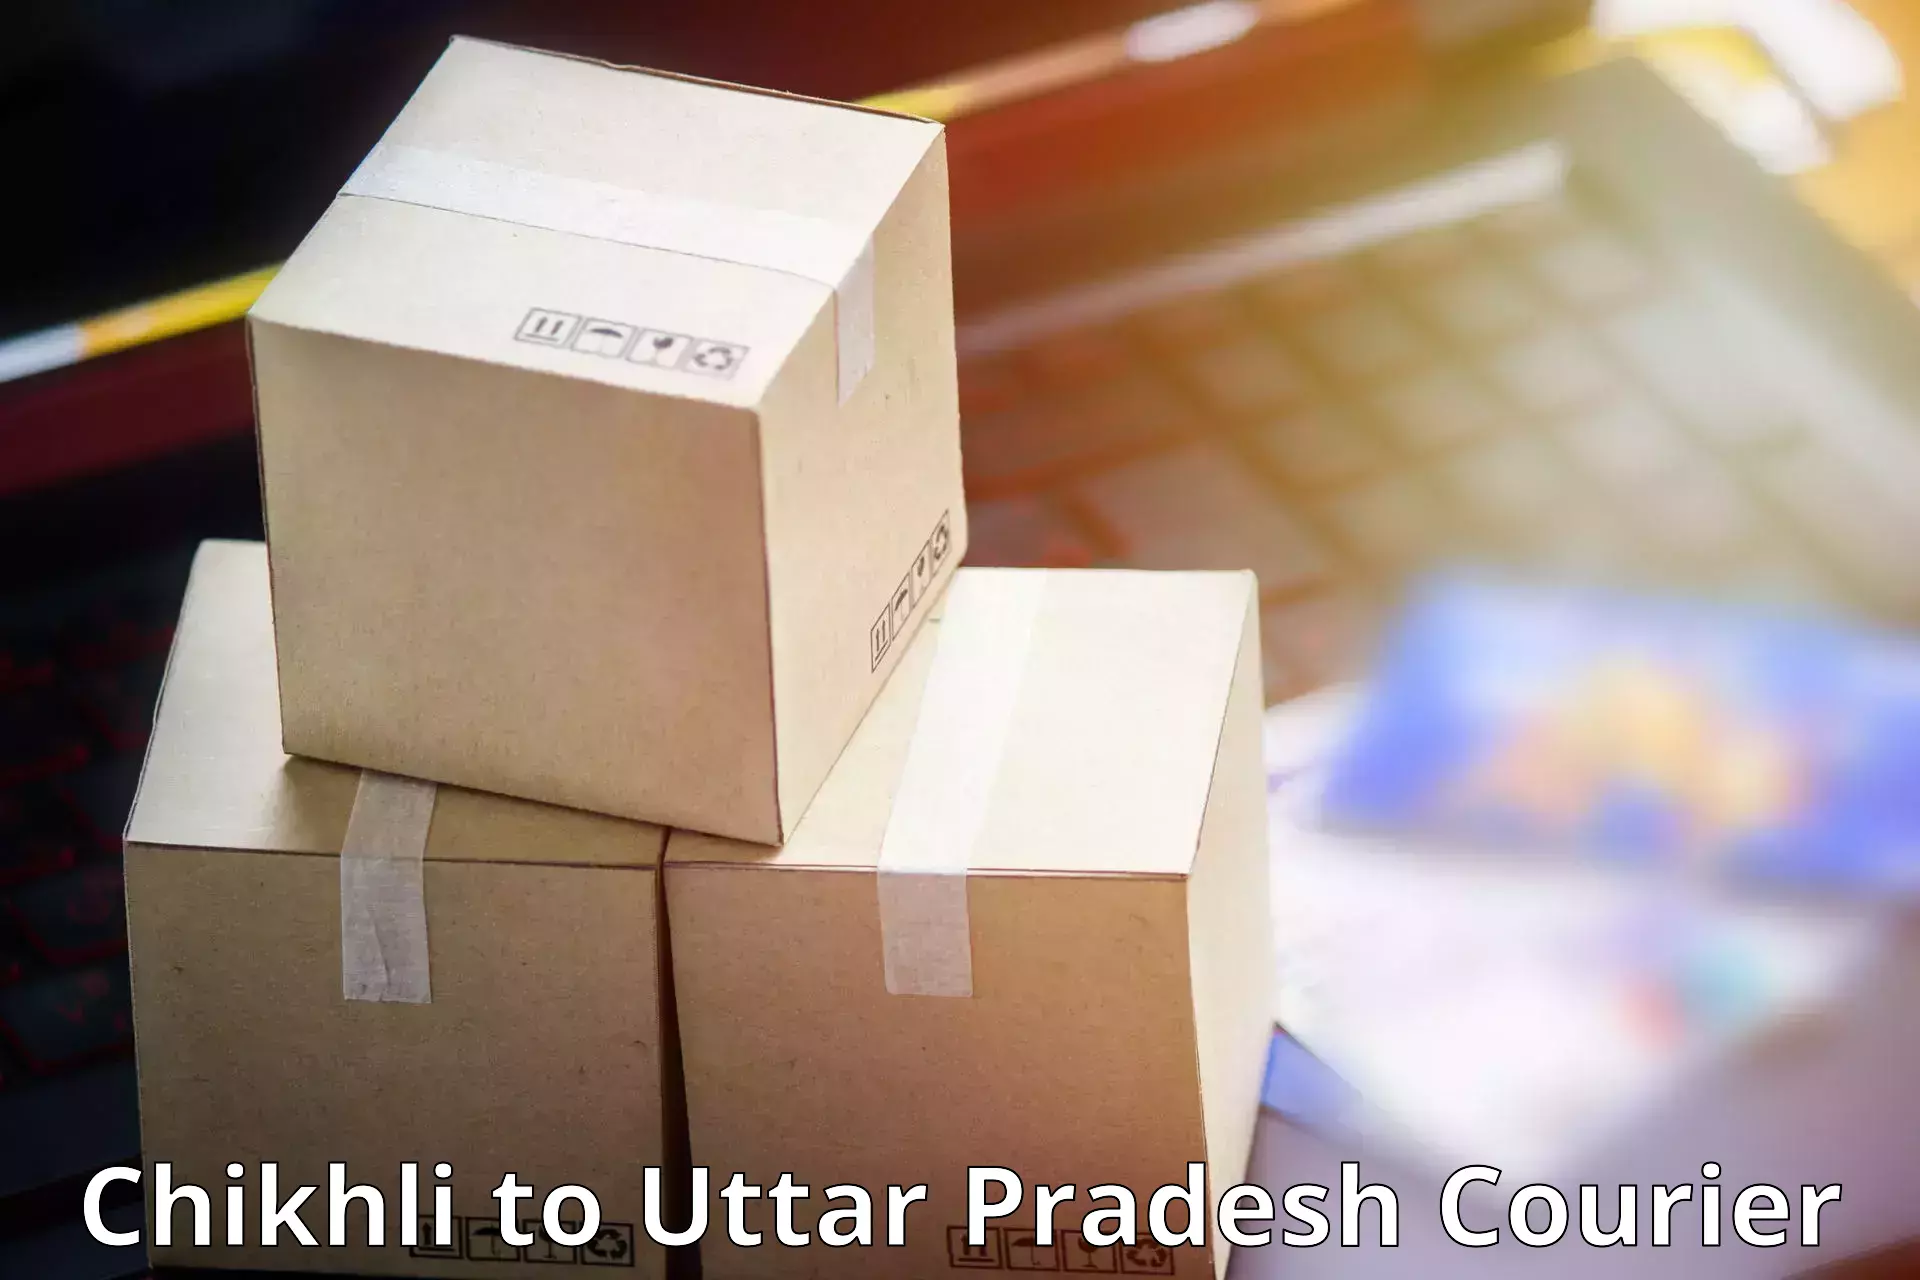 High-priority parcel service Chikhli to Rath